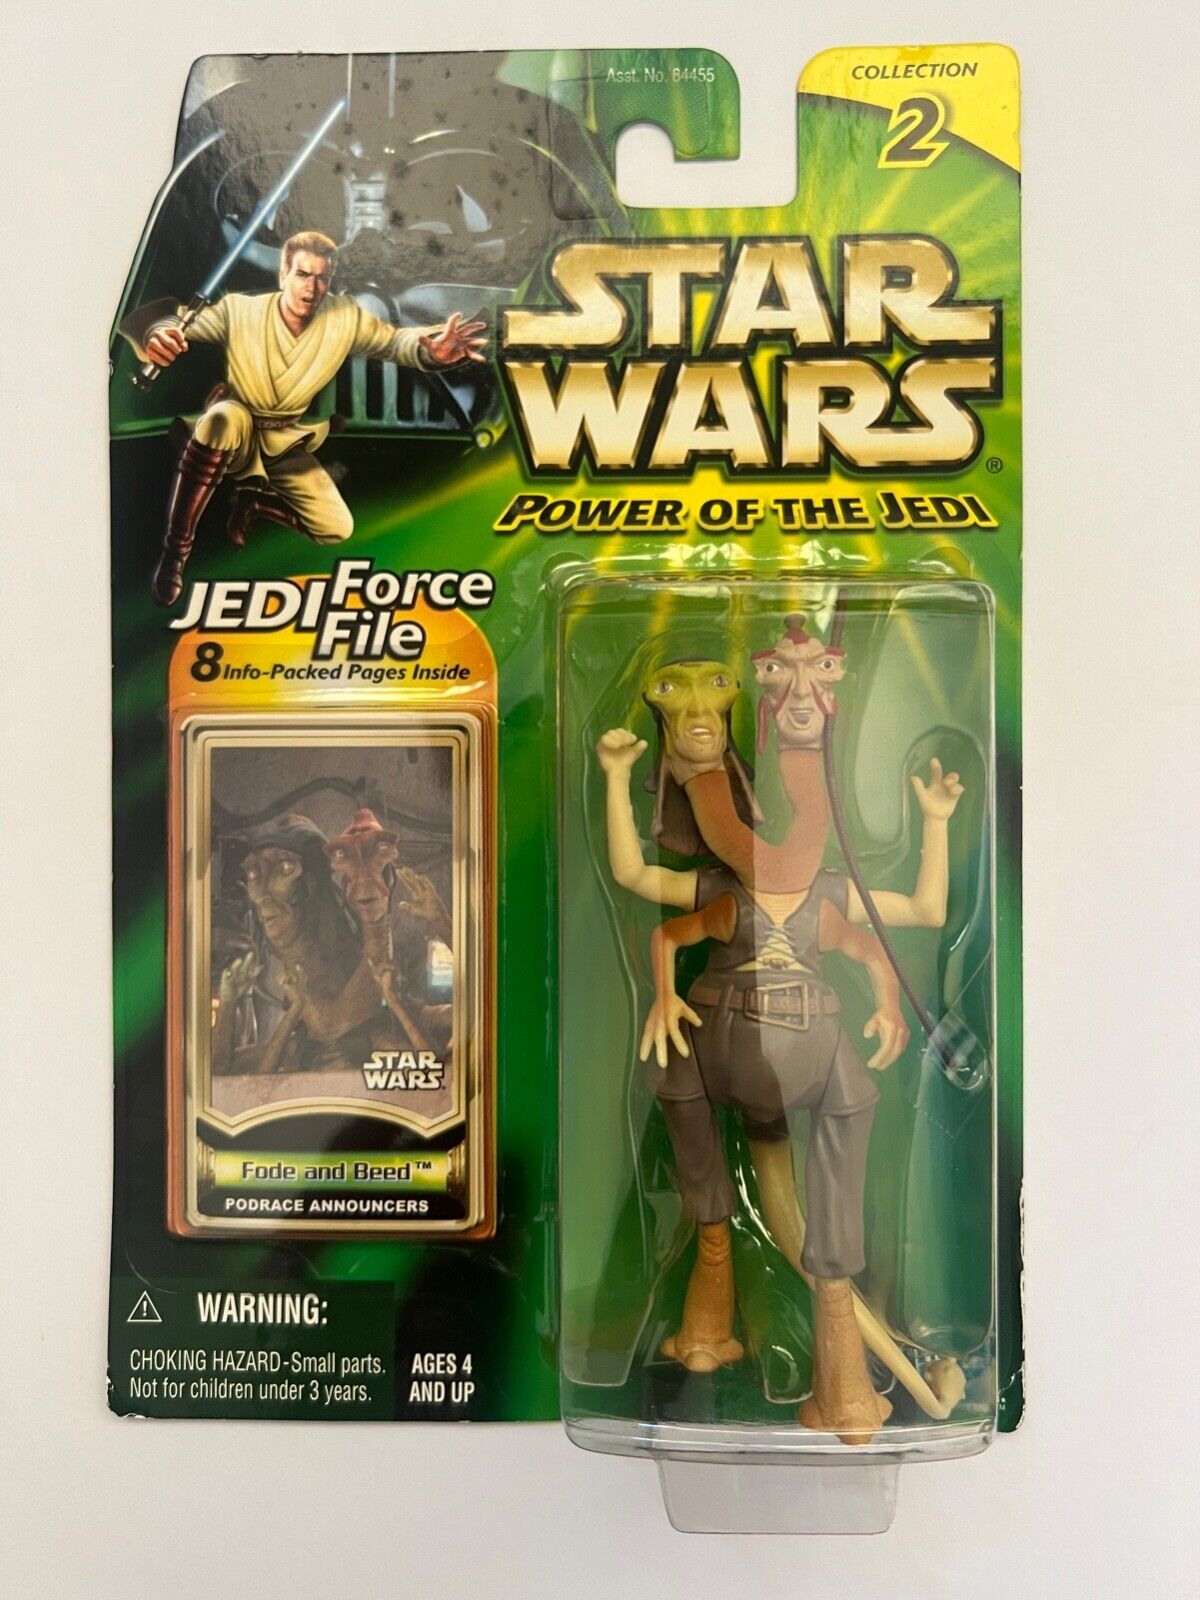 2000 Hasbro Star Wars Power of the Jedi Fode & Beed Podrace Announcers B4